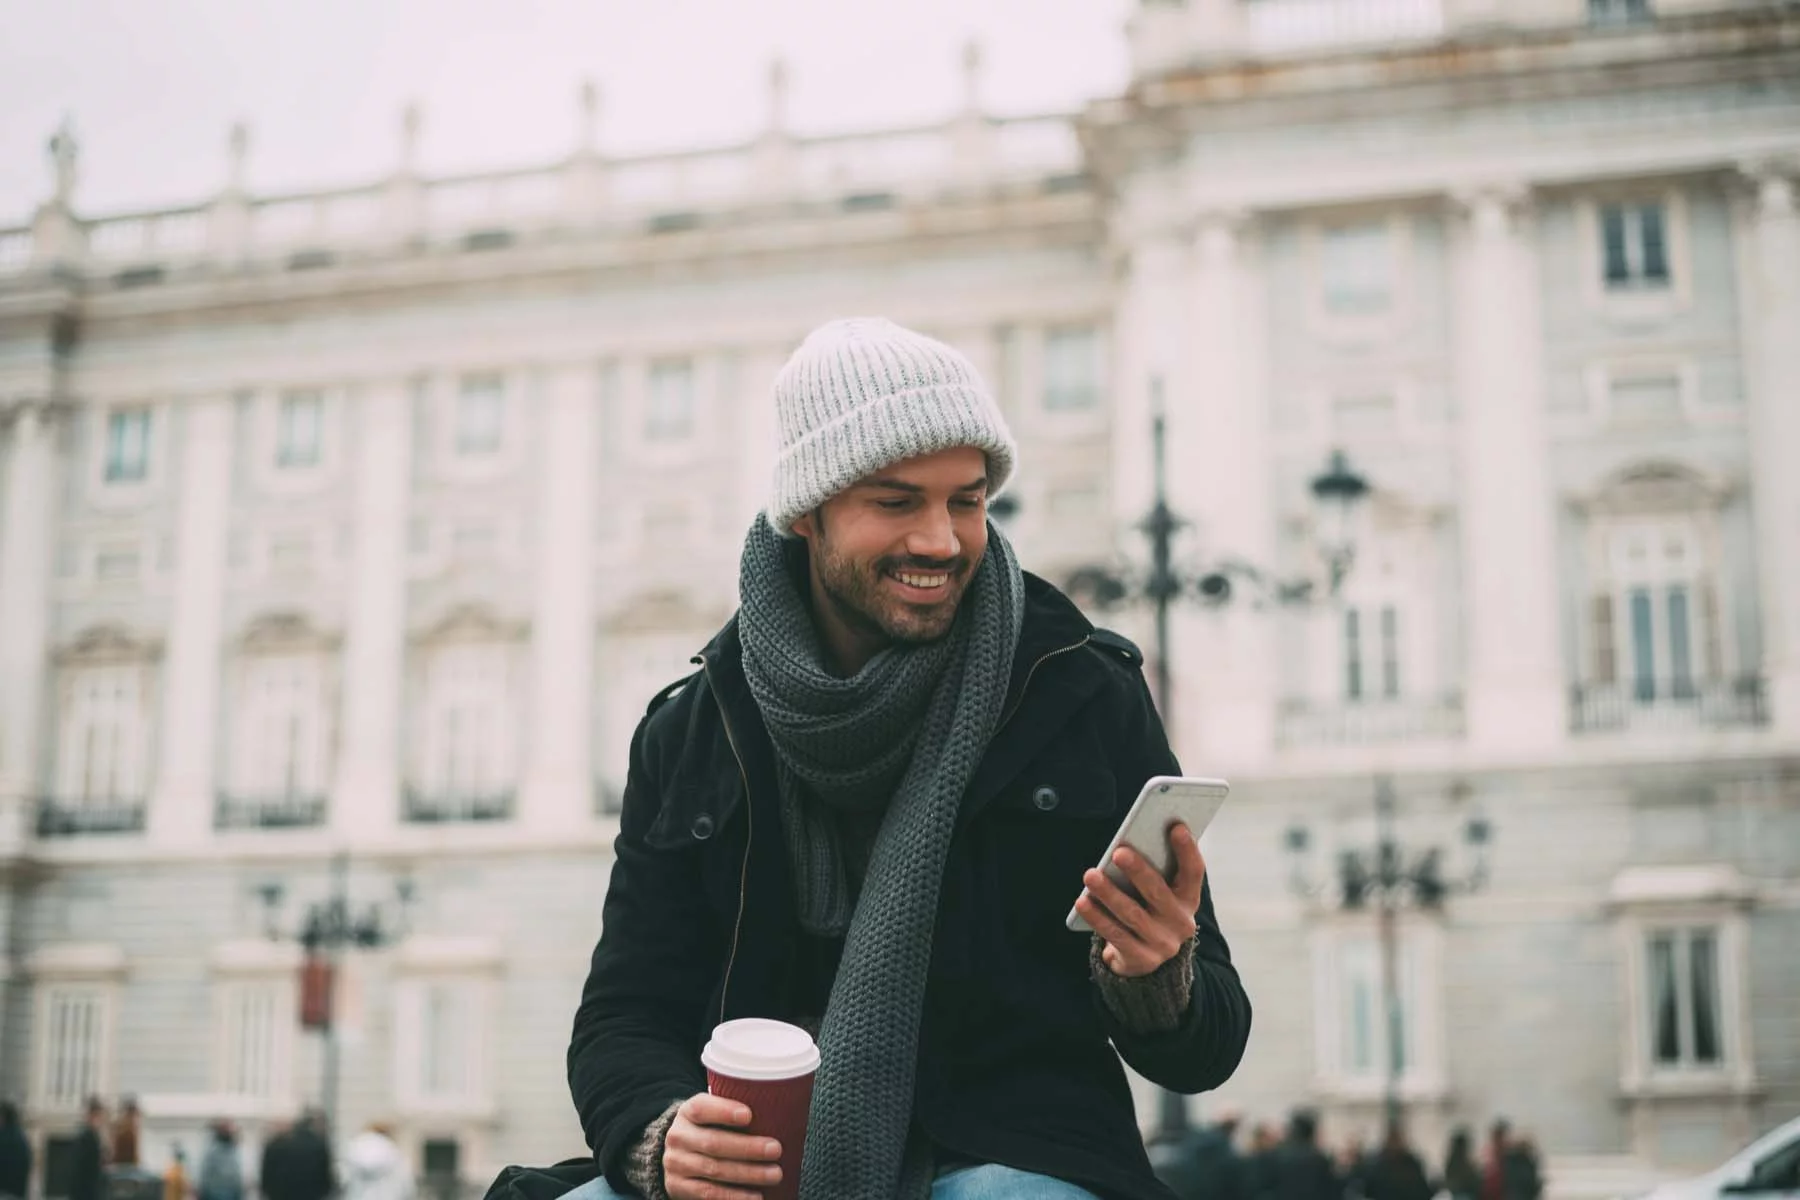 Man looking at phone in front of stone building